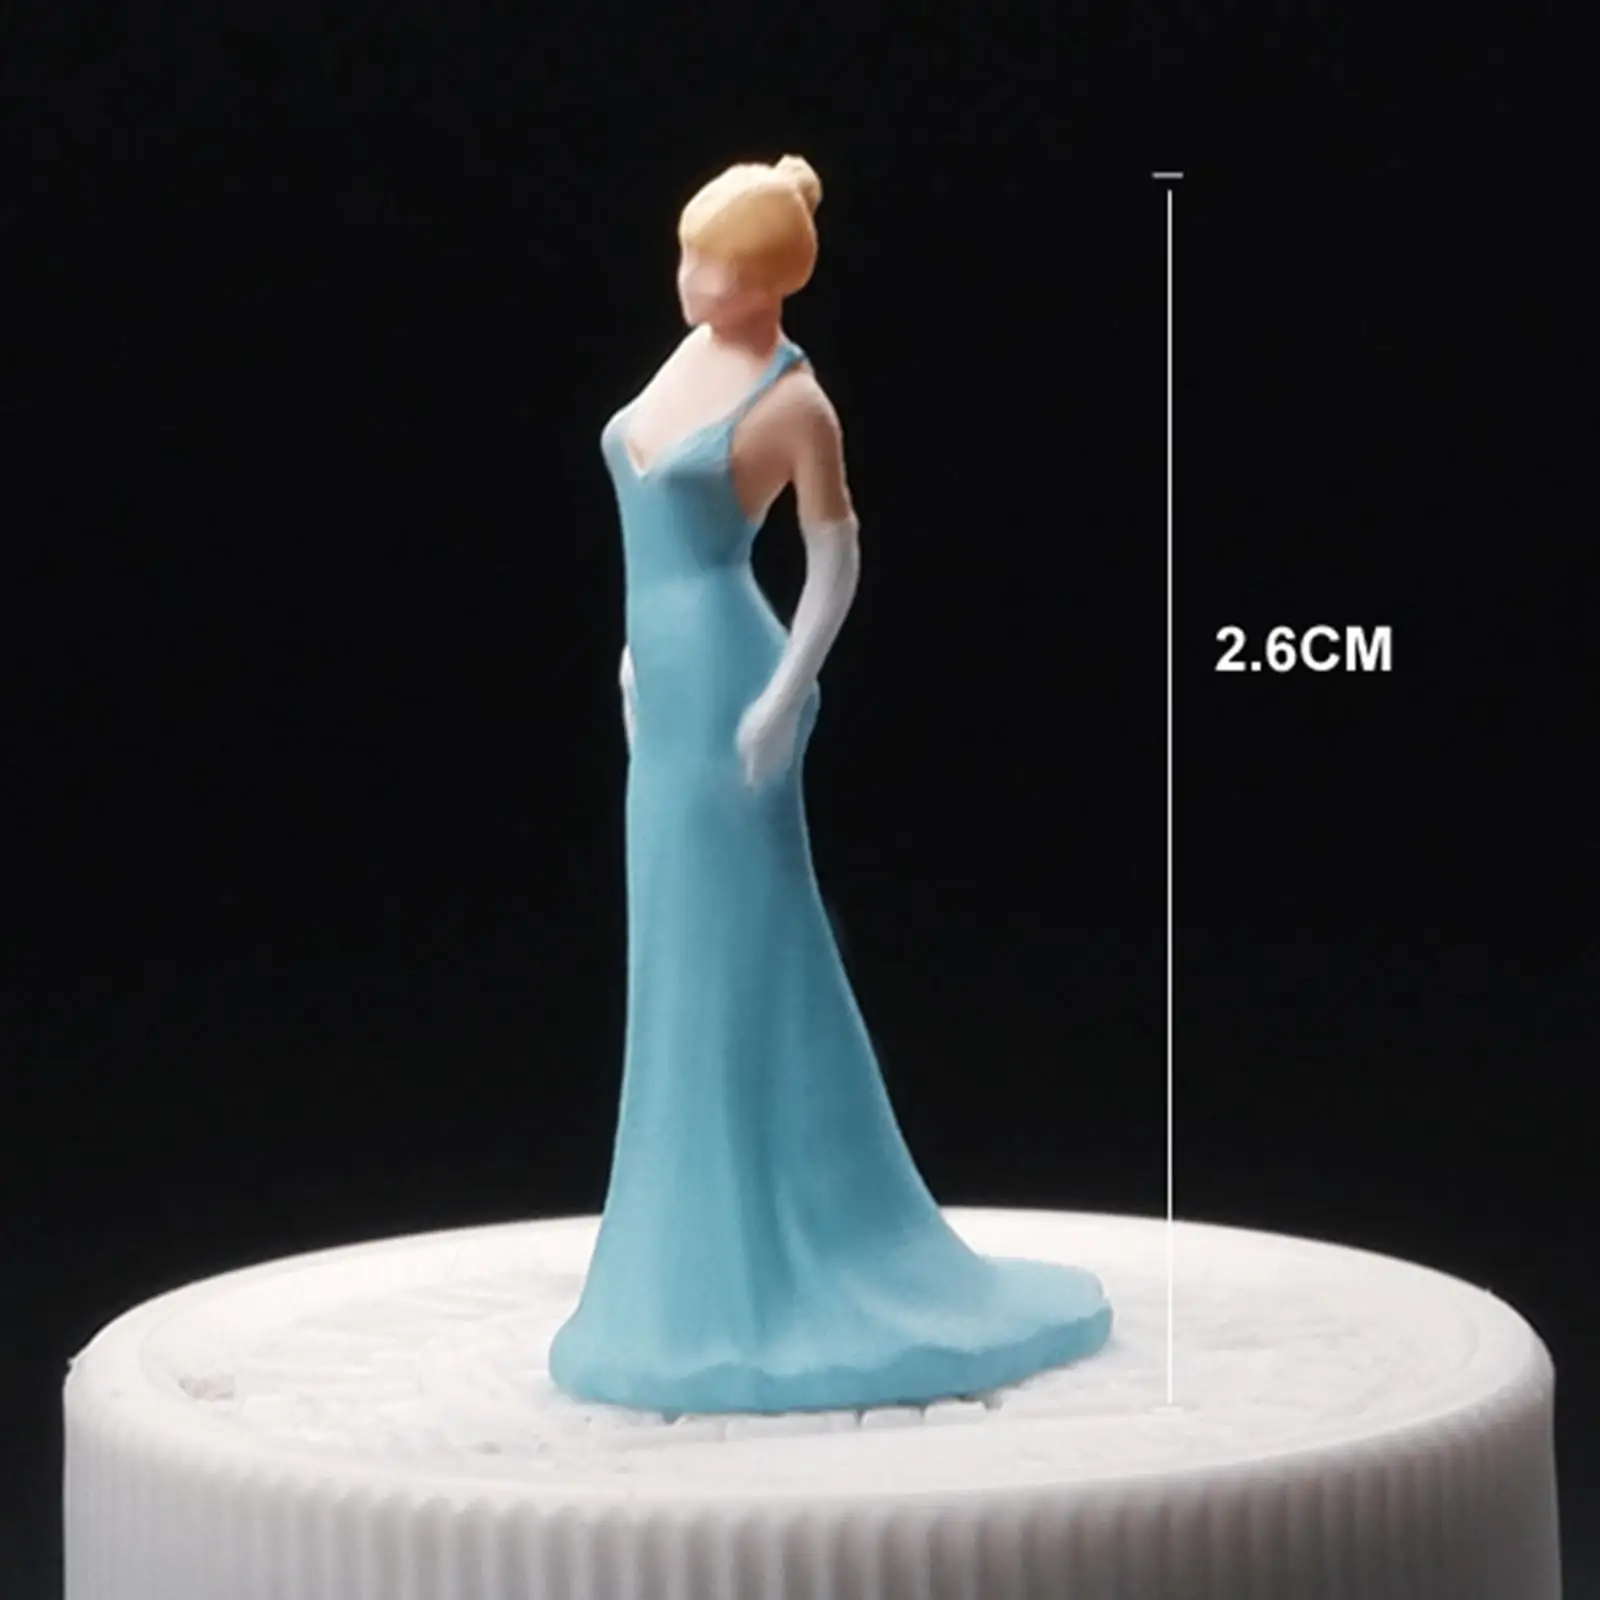 1:64 Scale Figures with Evening Dress Photography Prop Tiny Role Play Figure Character Model for DIY Scene Train Station Layout